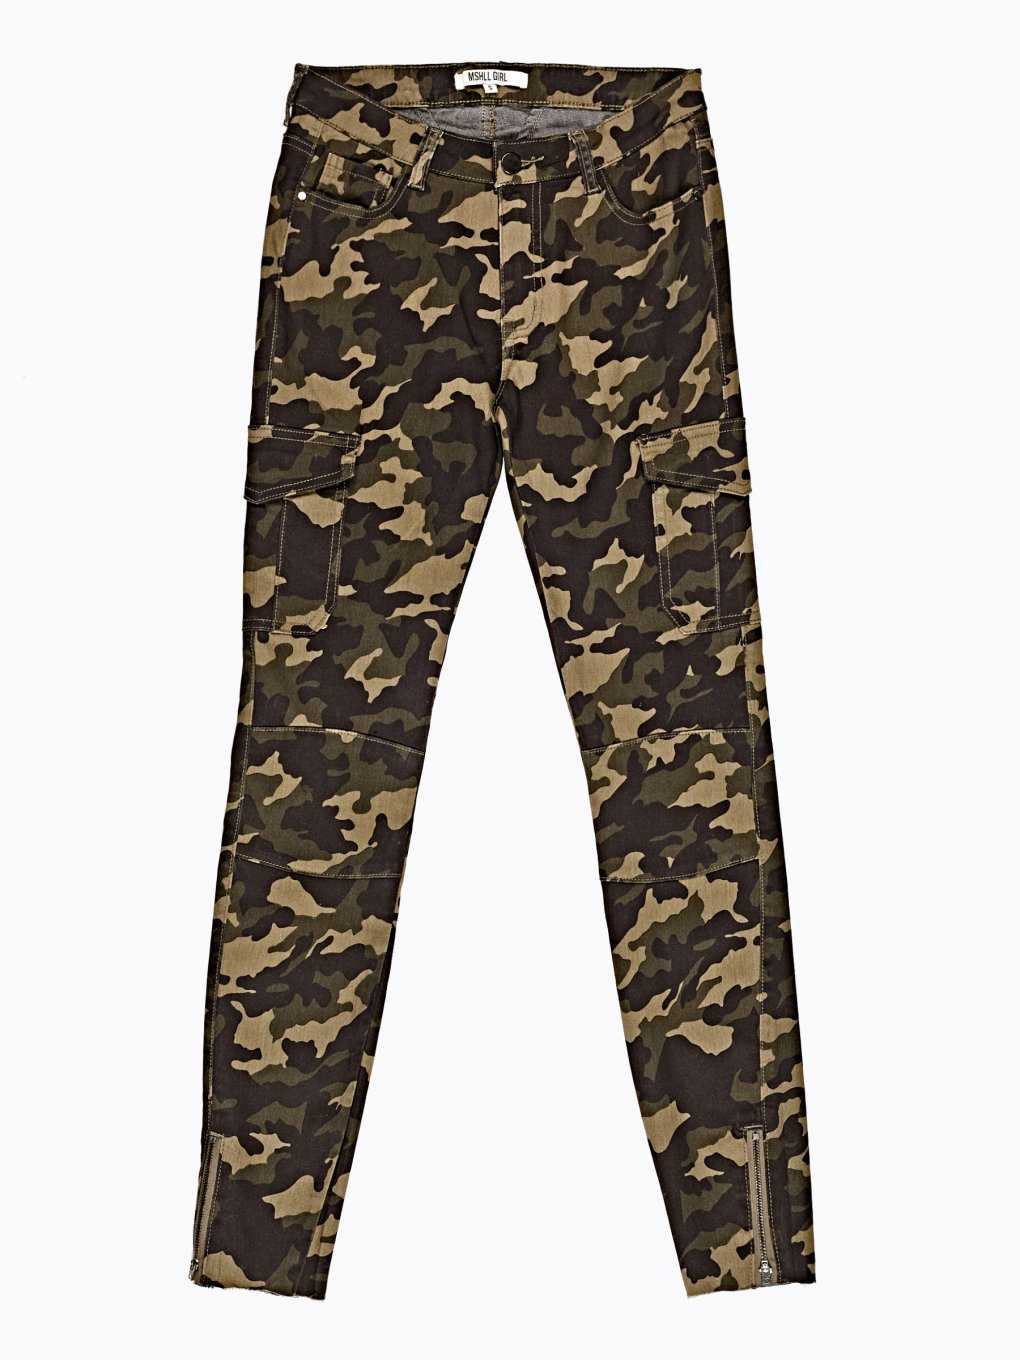 Camo print skinny trousers with zippers